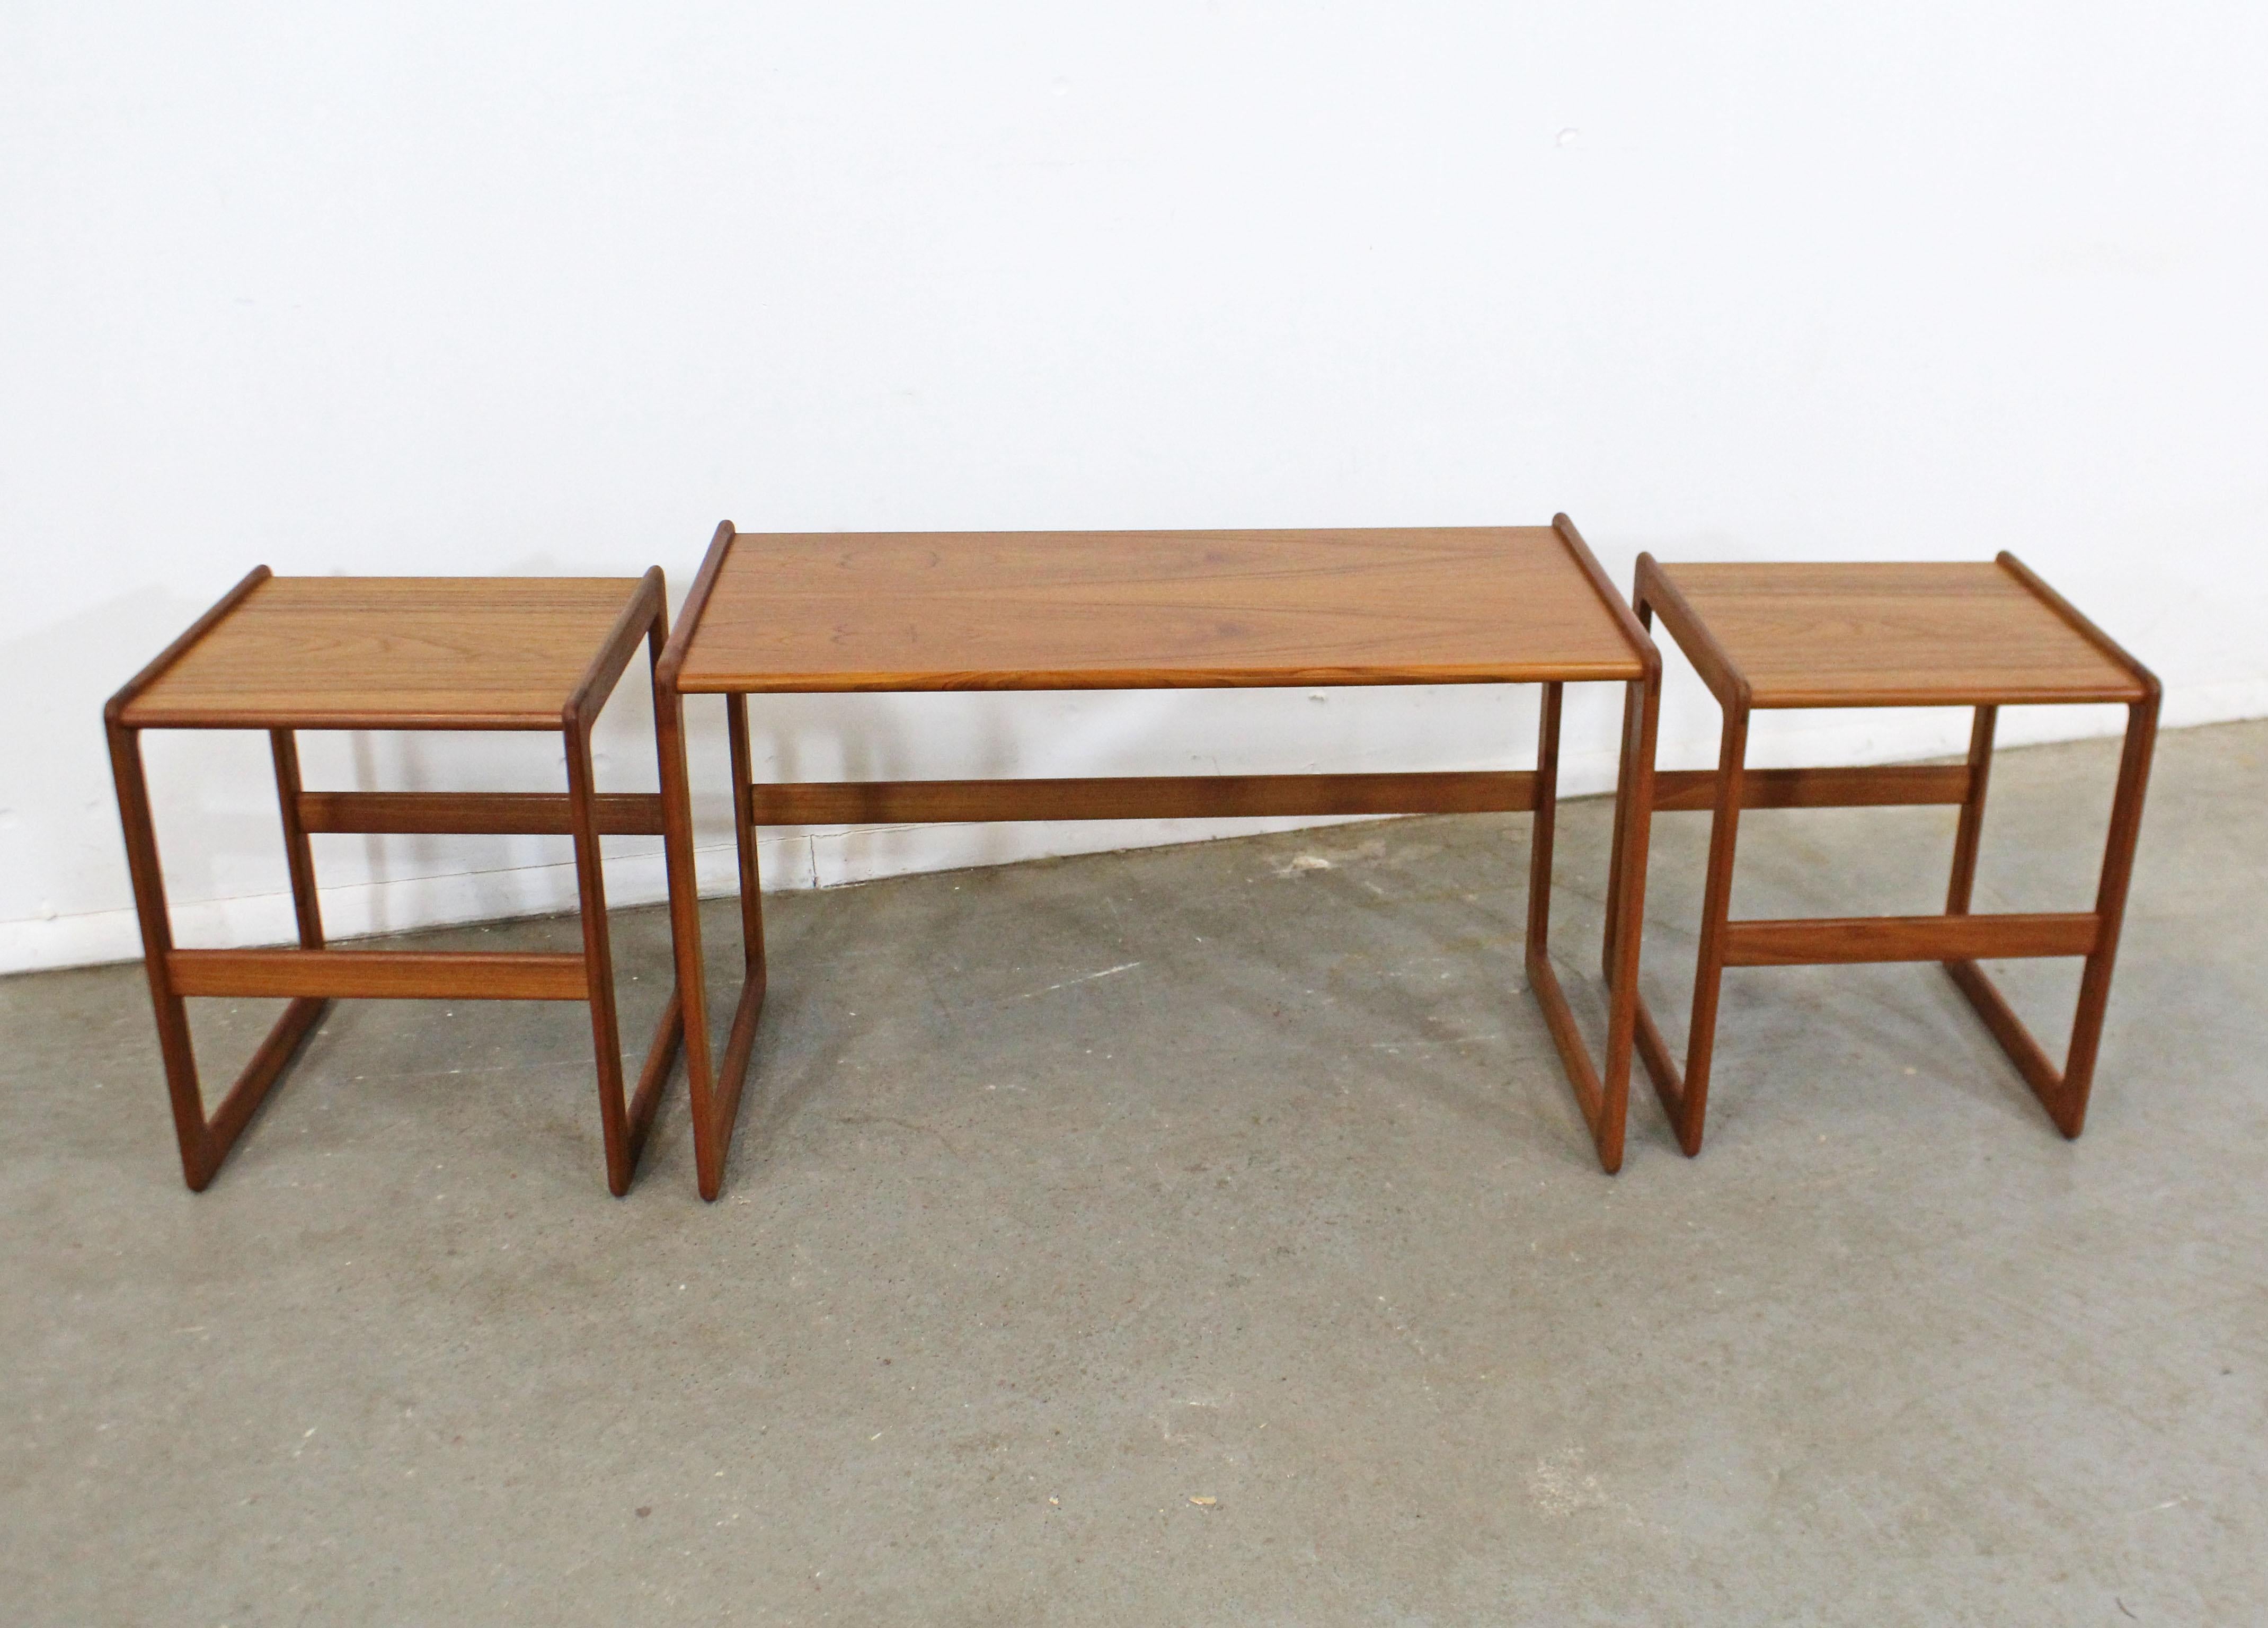 What a find. Offered is a multifunctional set of 3 Danish modern teak nesting tables, designed by Arne Hovmand-Olsen for Mogens Kold, circa 1962. Includes two smaller tables that fit perfectly underneath a larger table. They are in excellent vintage